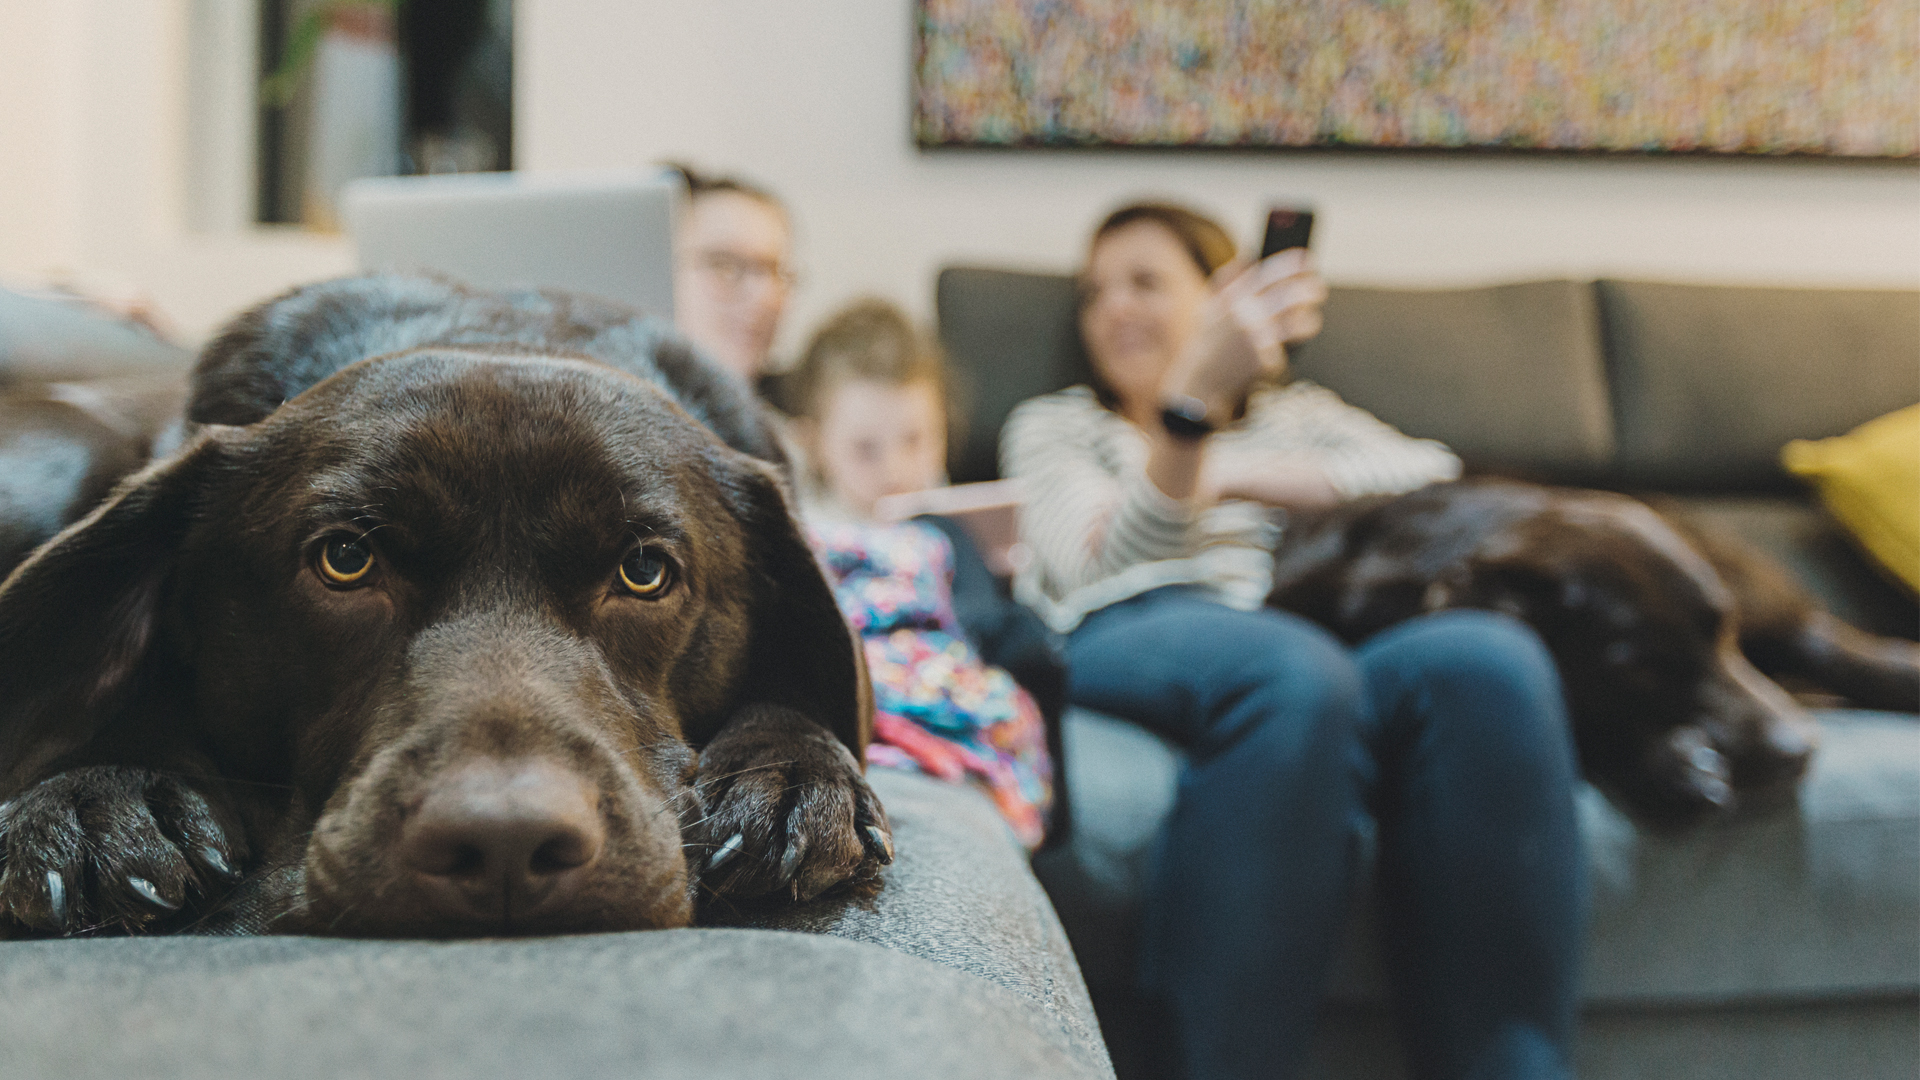 How to clean the air in your home: image of dog and family on sofas